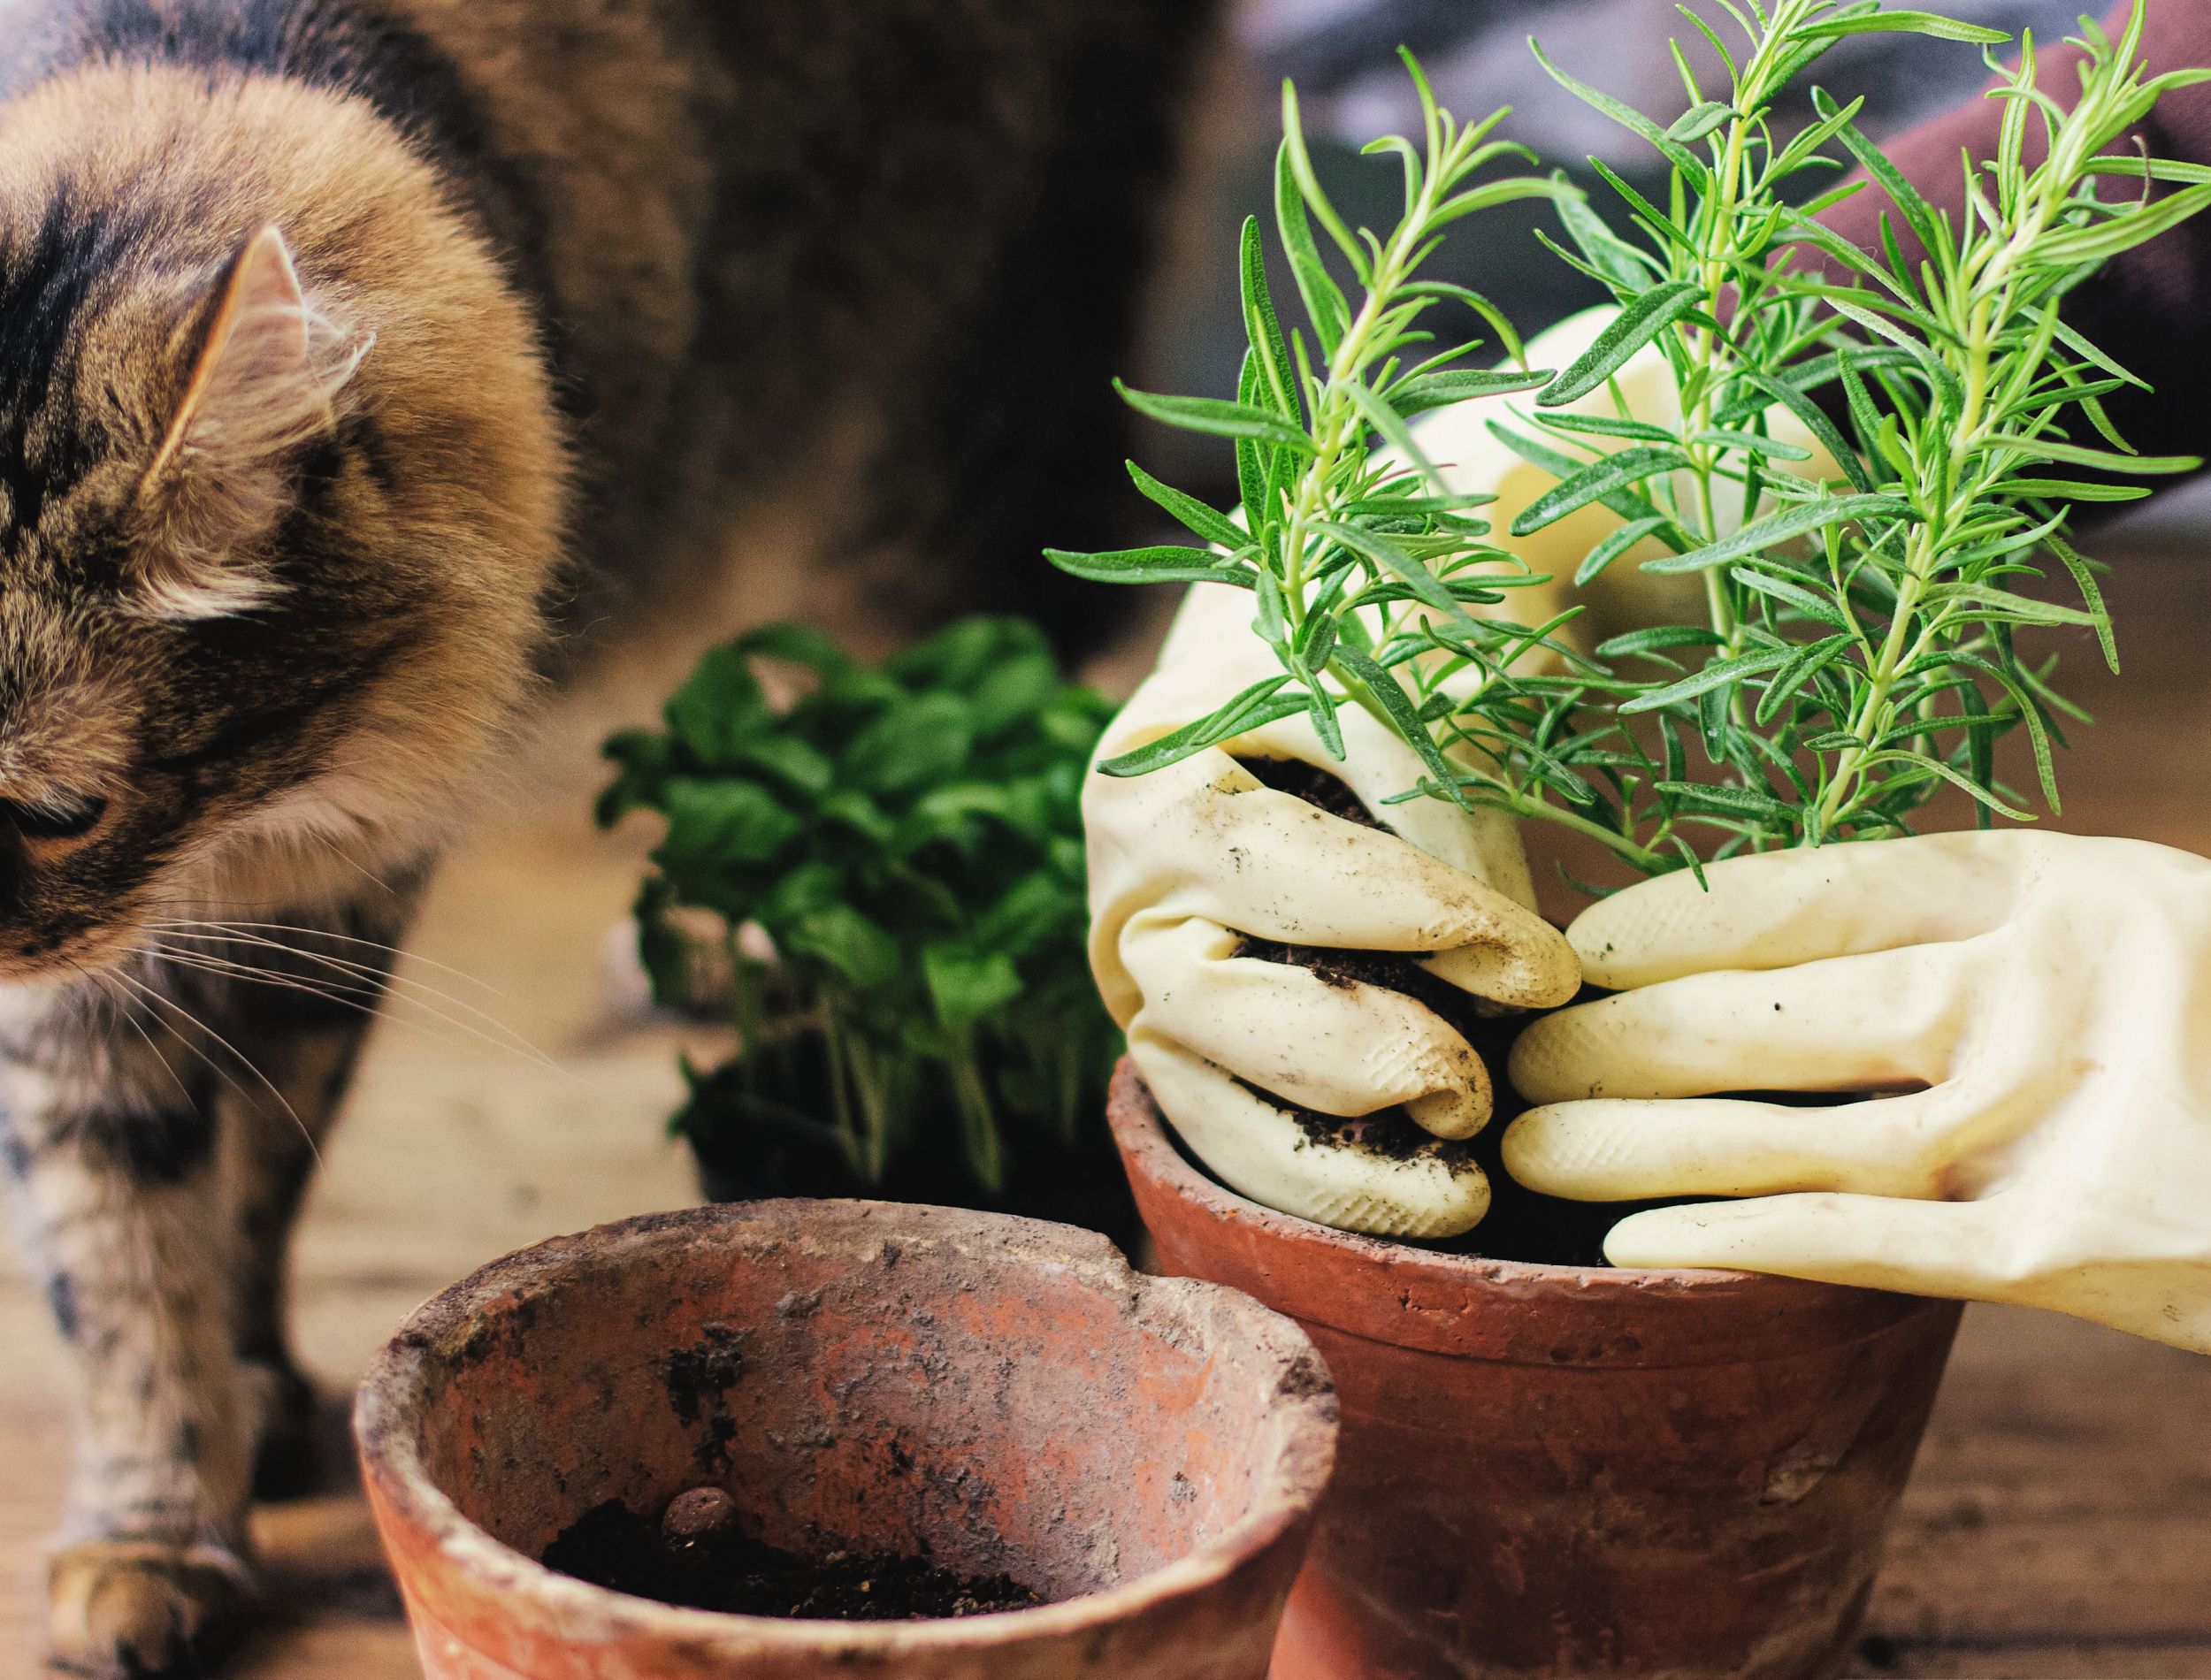 Woman hands in gloves potting rosemary plant in new pot and cute tabby cat helping in room. Repotting and cultivating aromatic herbs at home. Pets and plants